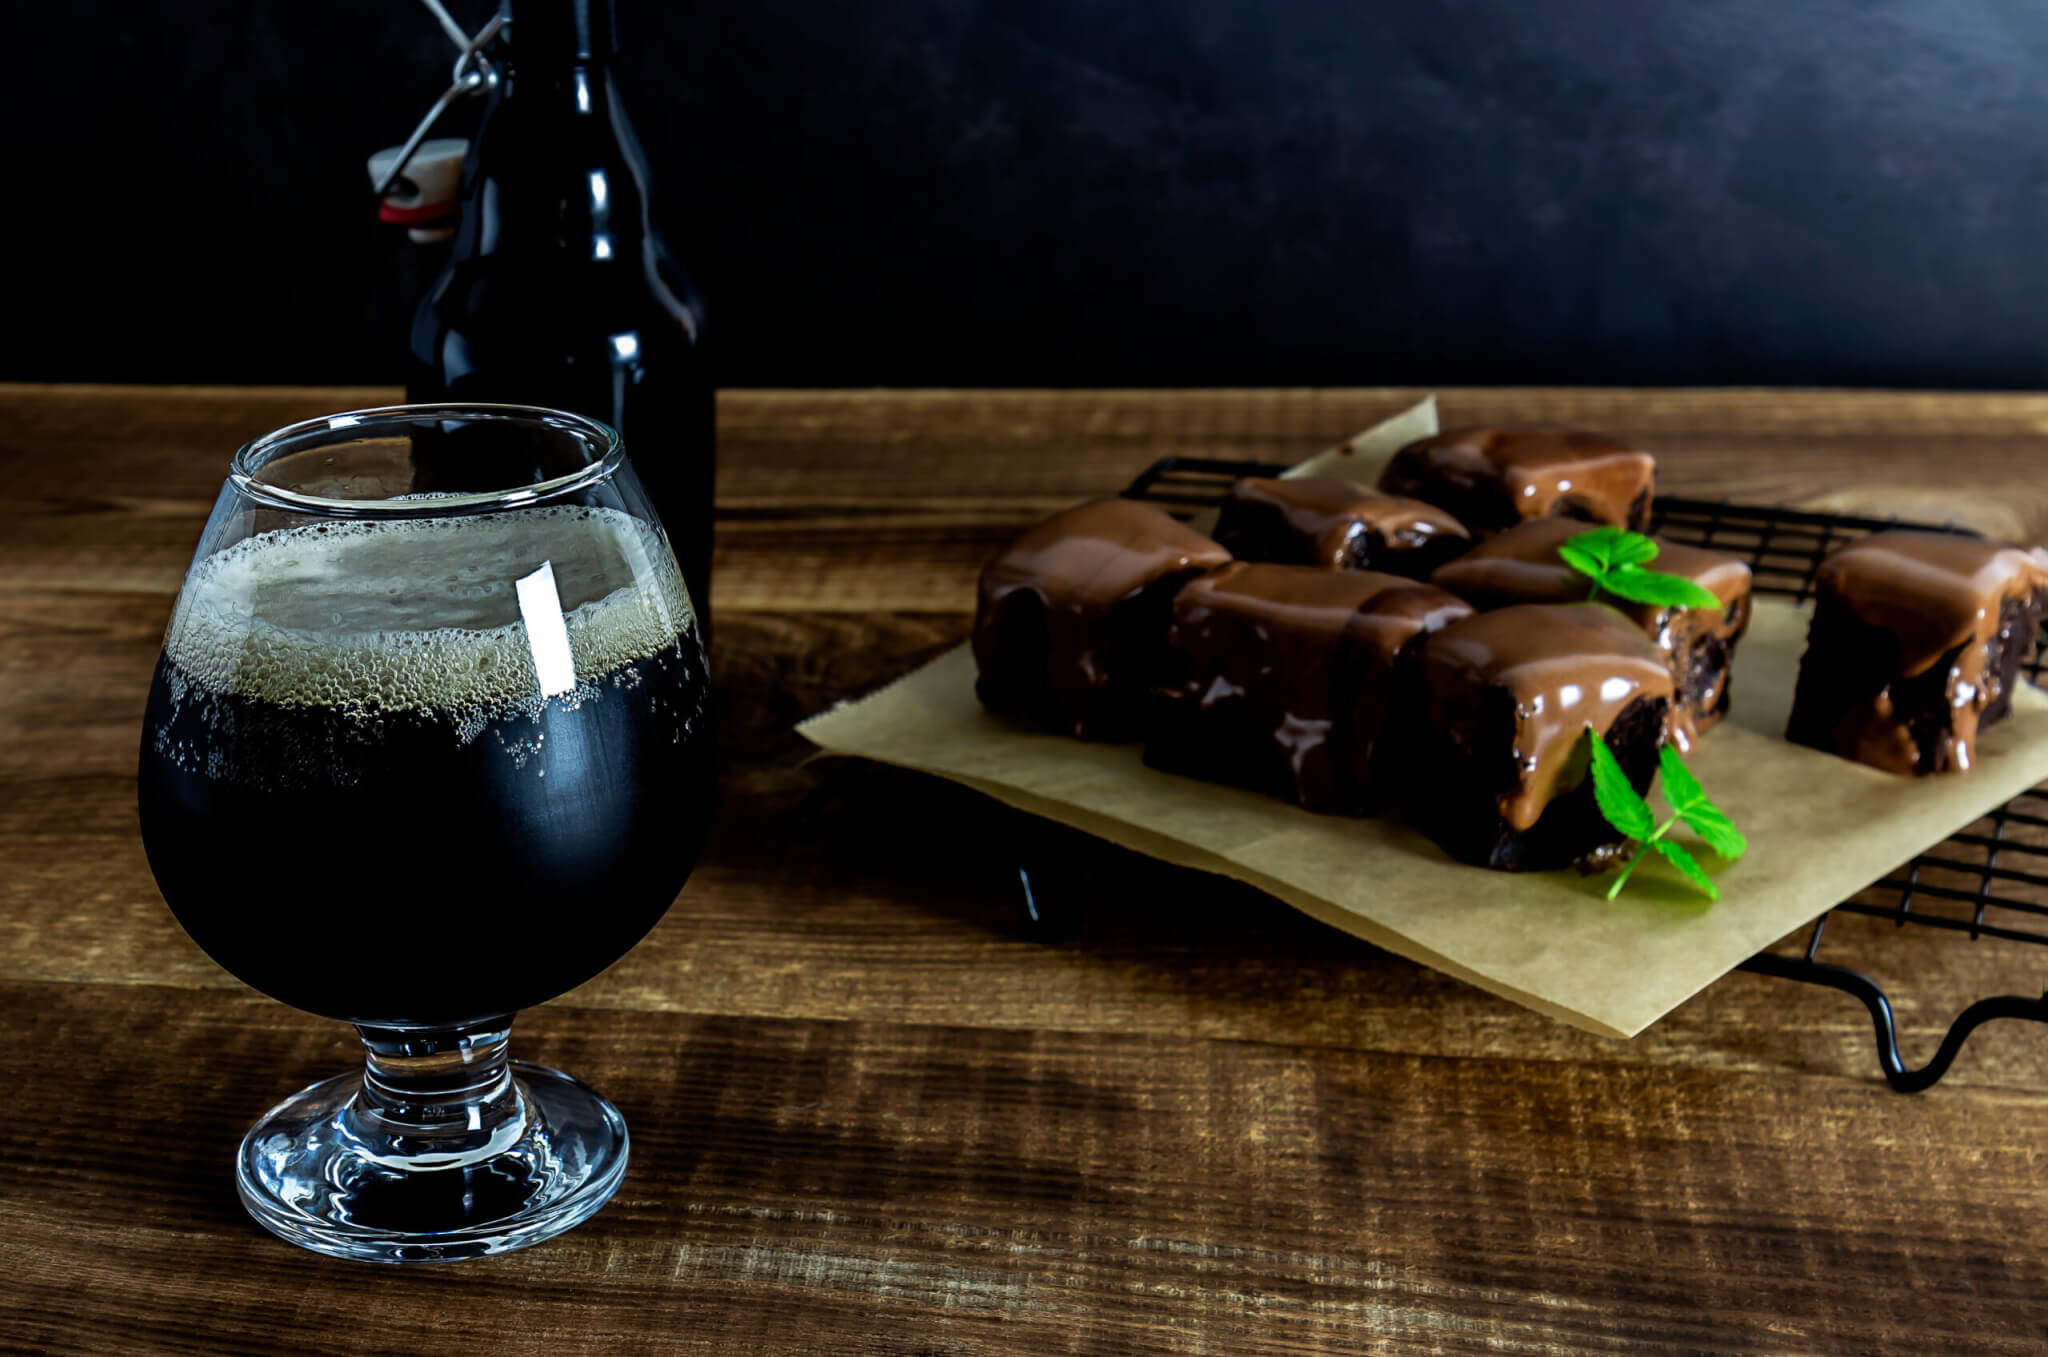 Craft stout beer with chocolate brownies.